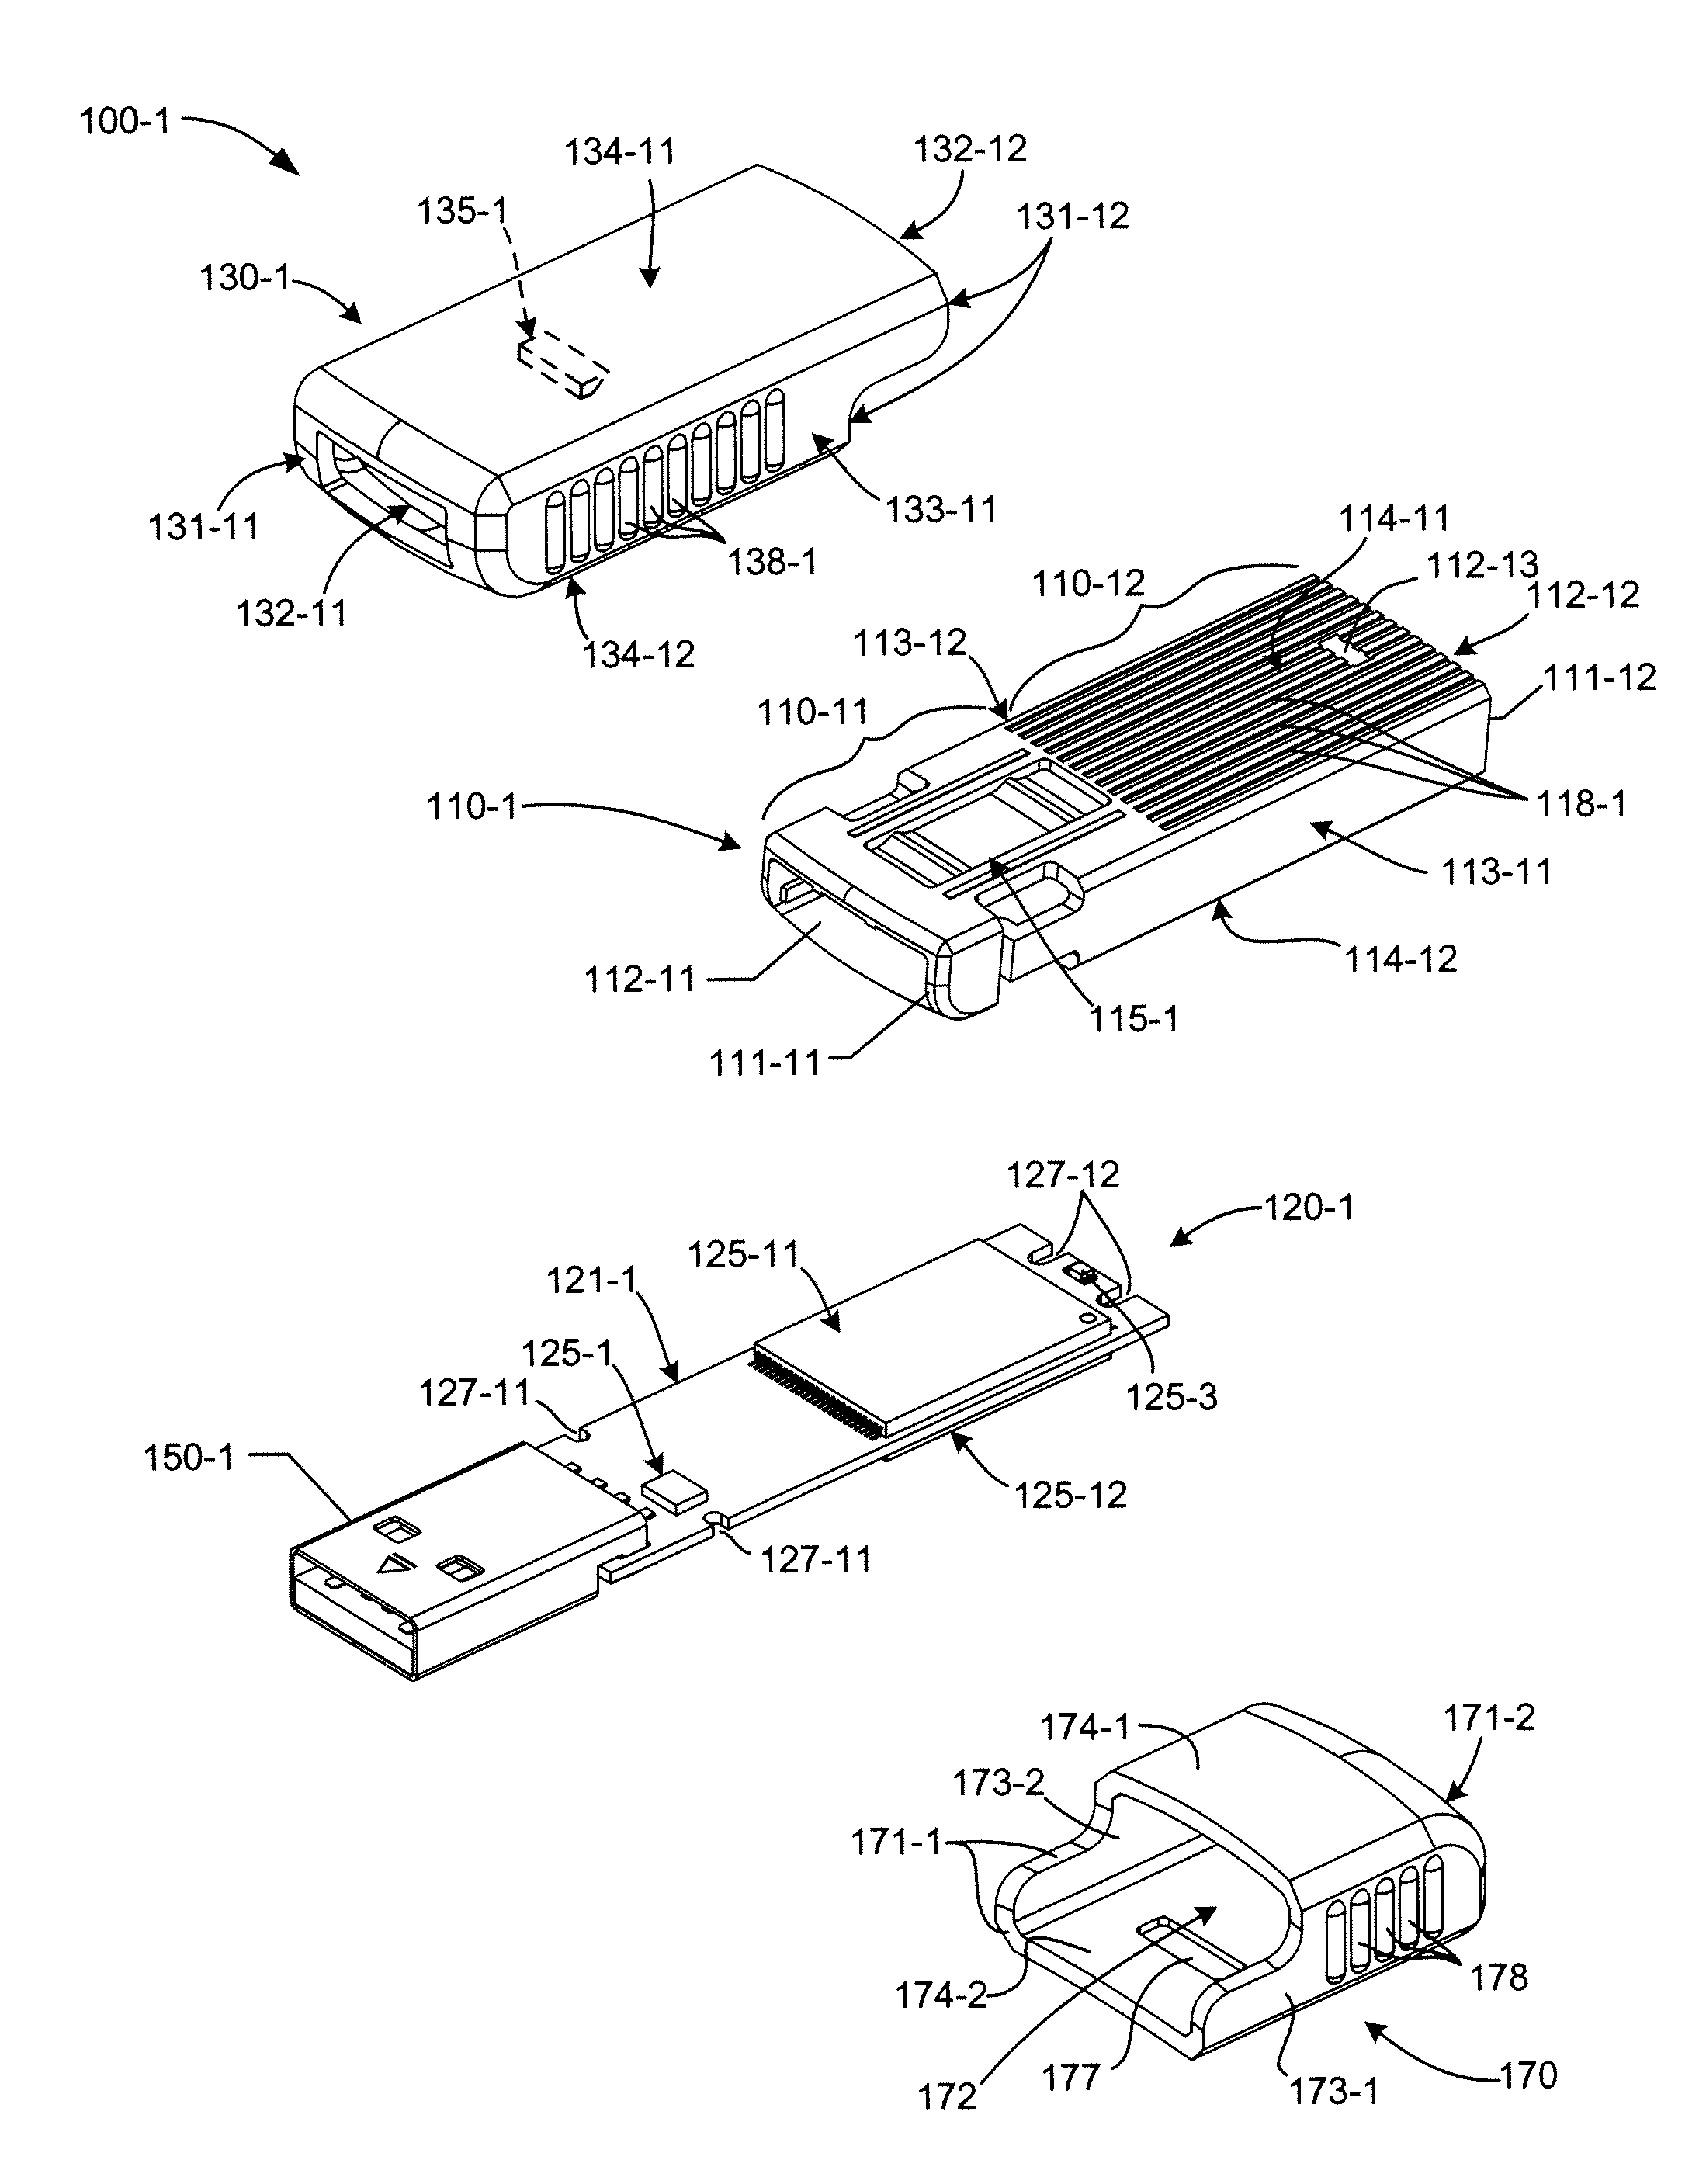 USB Flash Drive With Deploying And Retracting Functionalities Using Retractable Cover/Cap